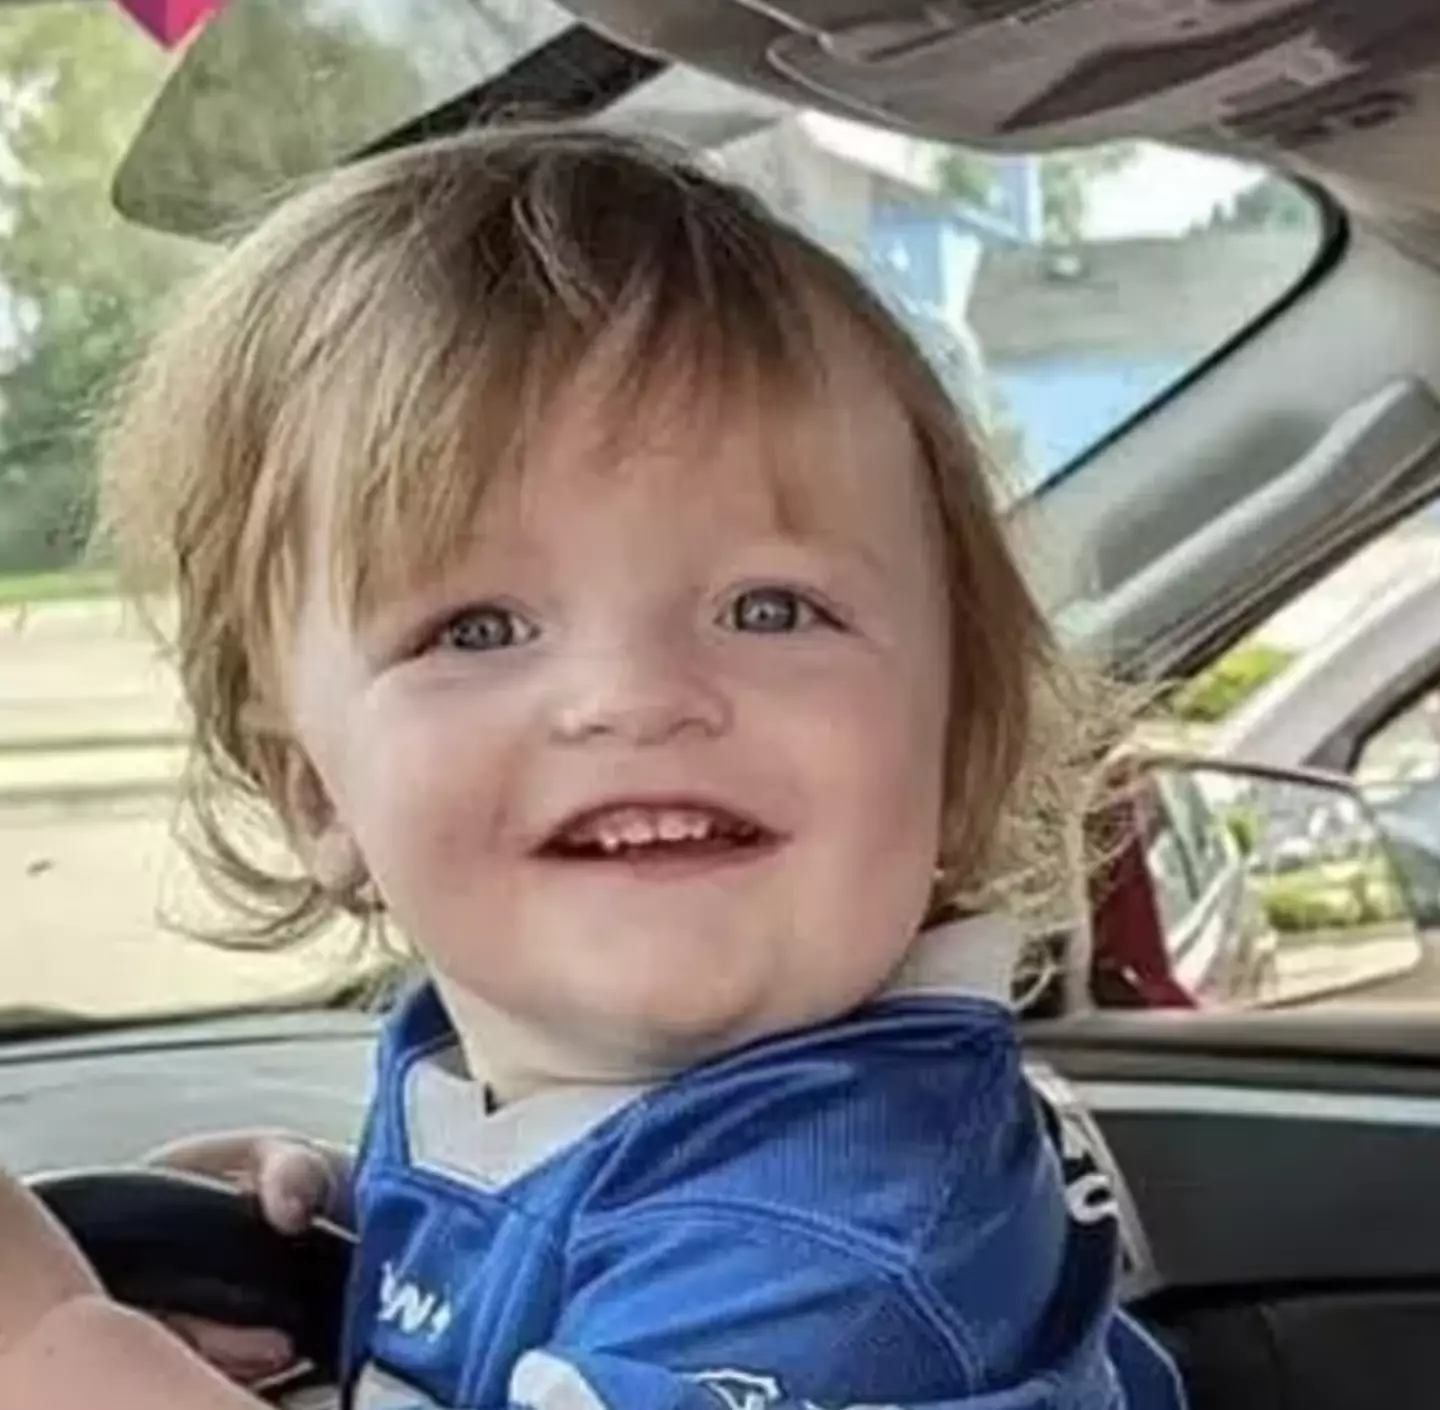 Kaiden Wood was just 17 months old.